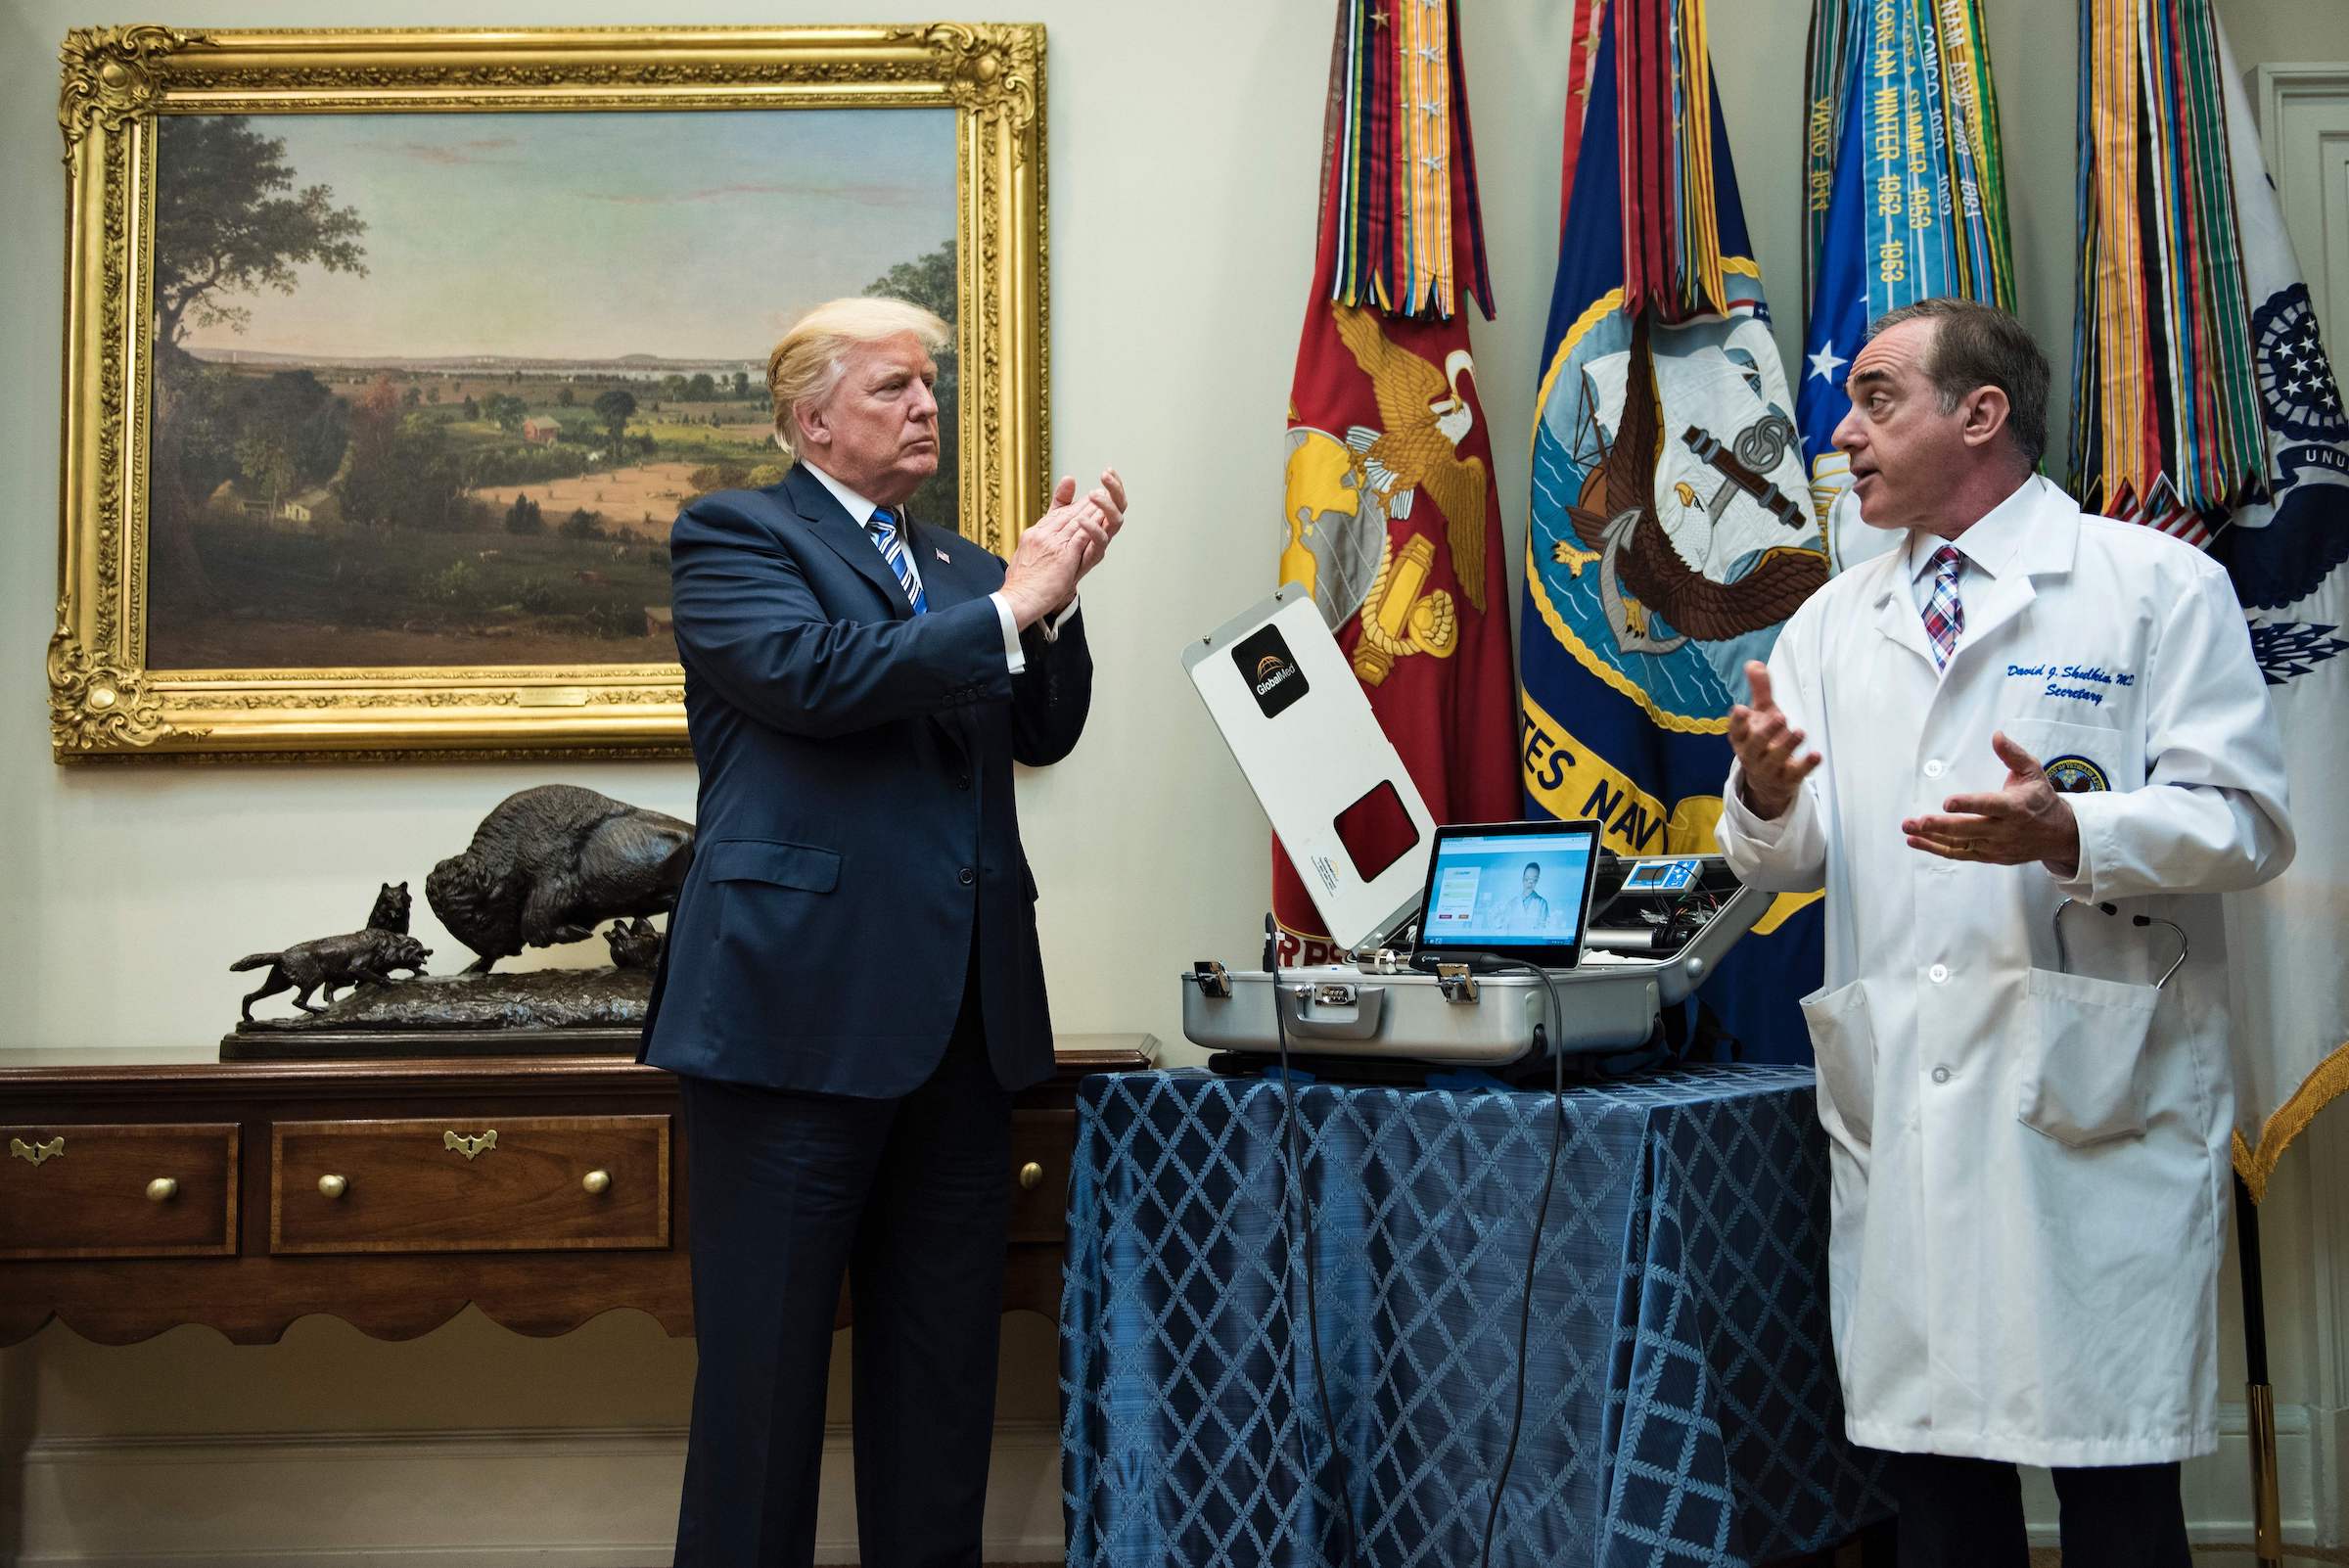 President Donald Trump claps as Secretary of Veterans Affairs David J. Shulkin speaks about new technology used by the Department of Veterans Affairs during an event in the White House on Aug. 3, 2017. (Brendan Smialowski—AFP/Getty Images)